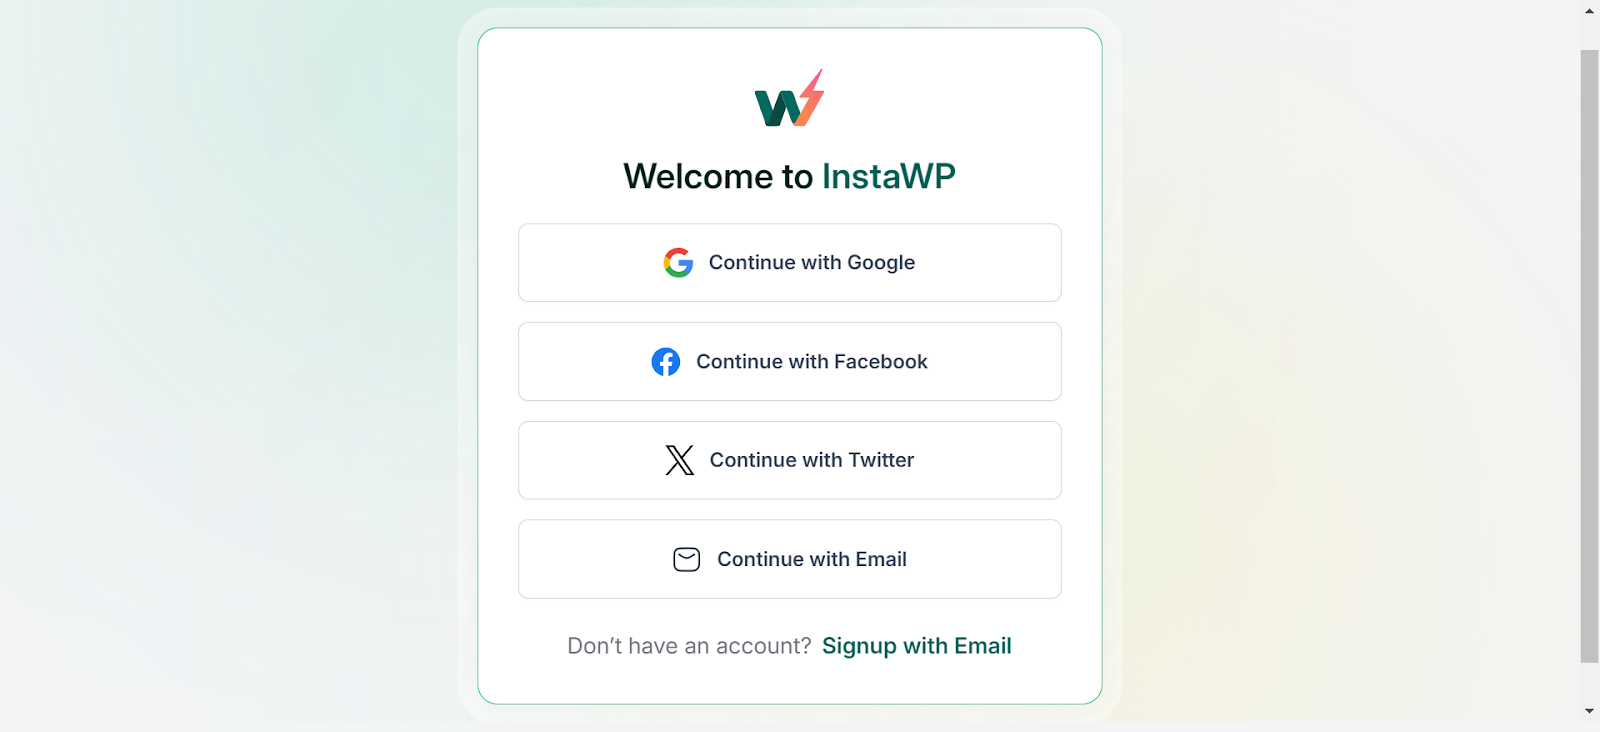 InstaWP Choose the signup Method